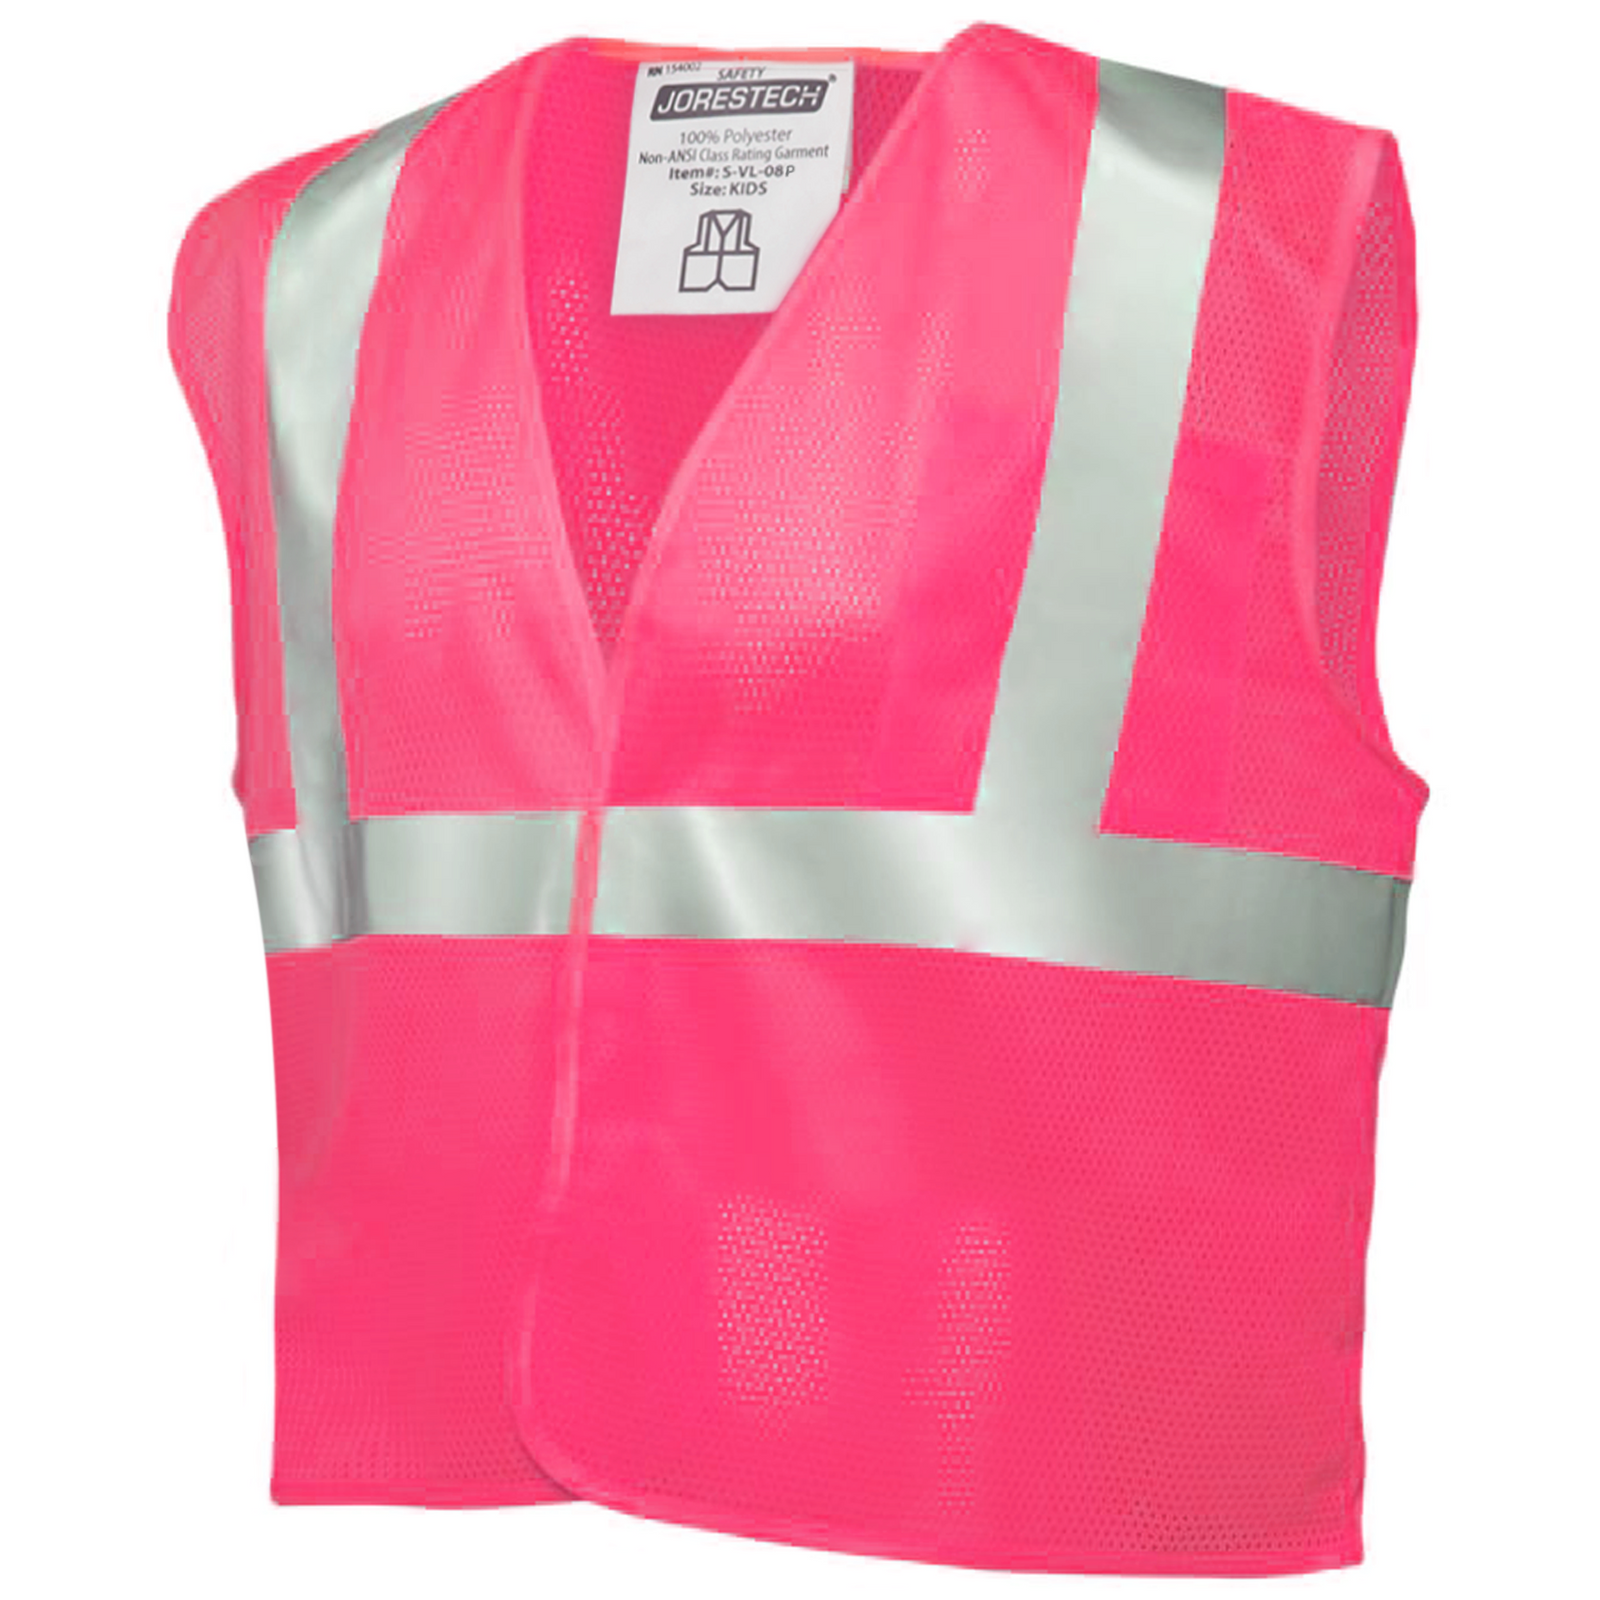 Pink safety vest for girls with reflective strips.